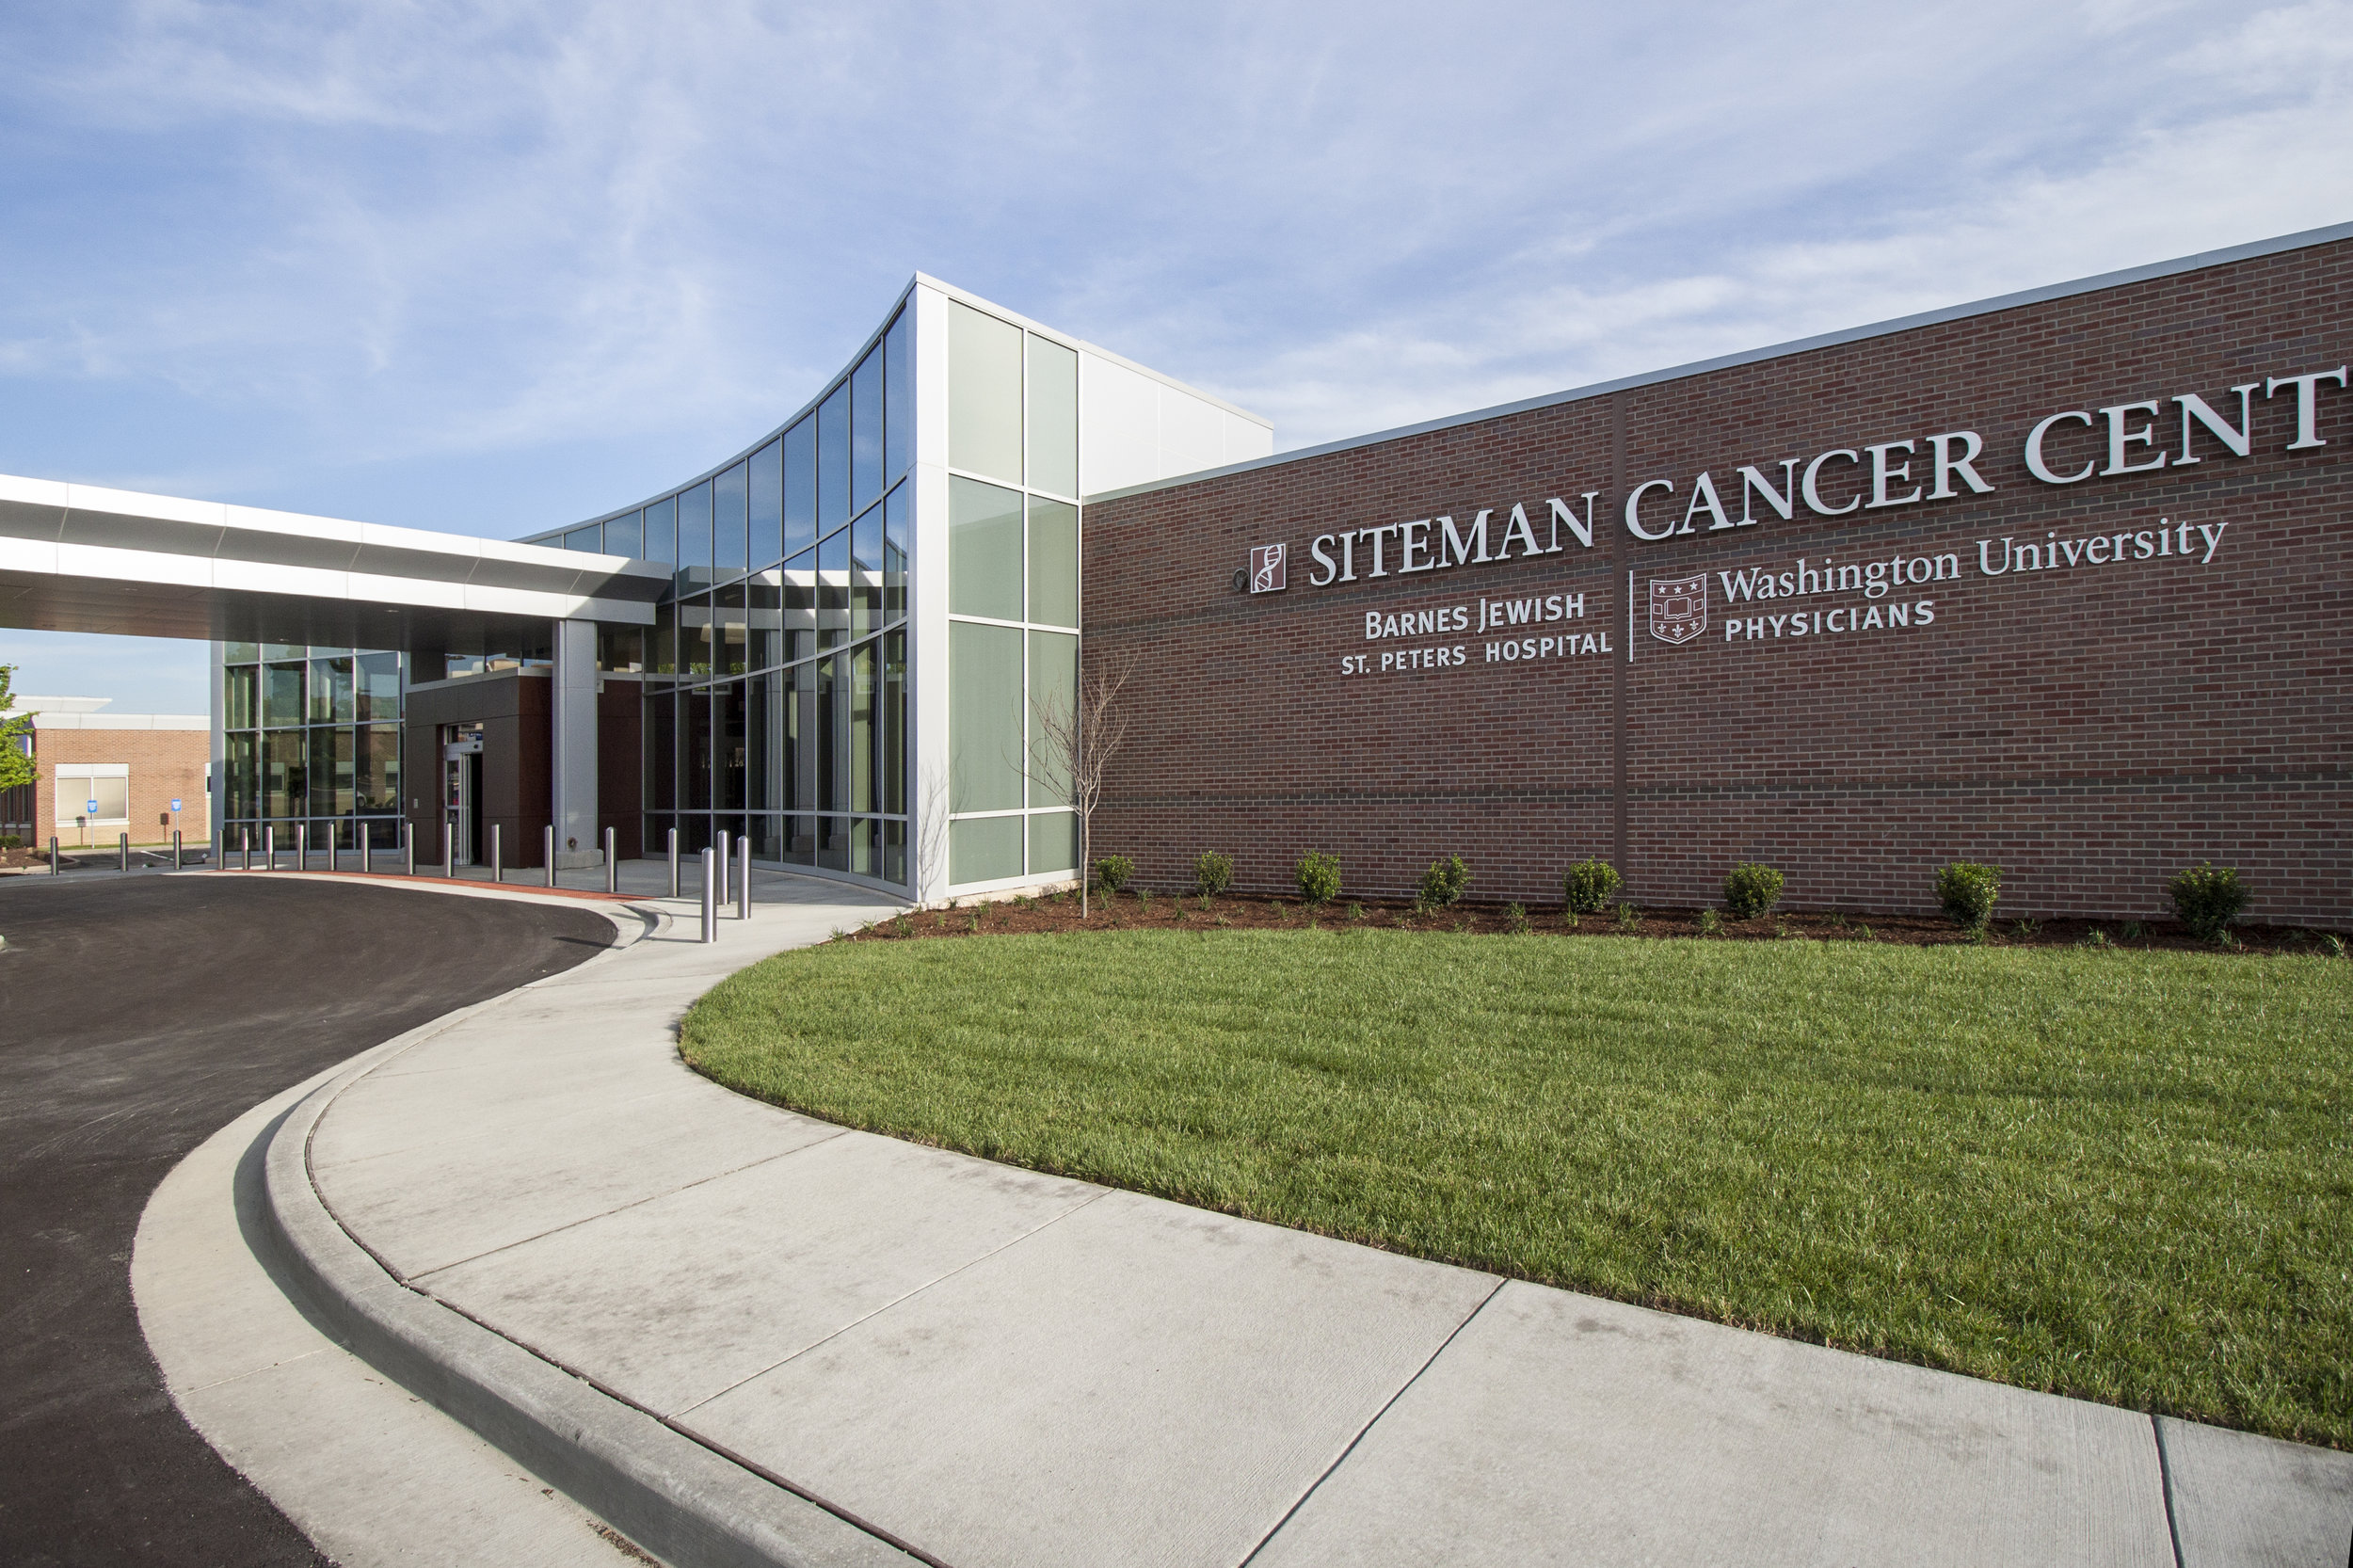 Siteman Cancer Center At Barnes Jewish St Peters Hospital Core1o Architecture